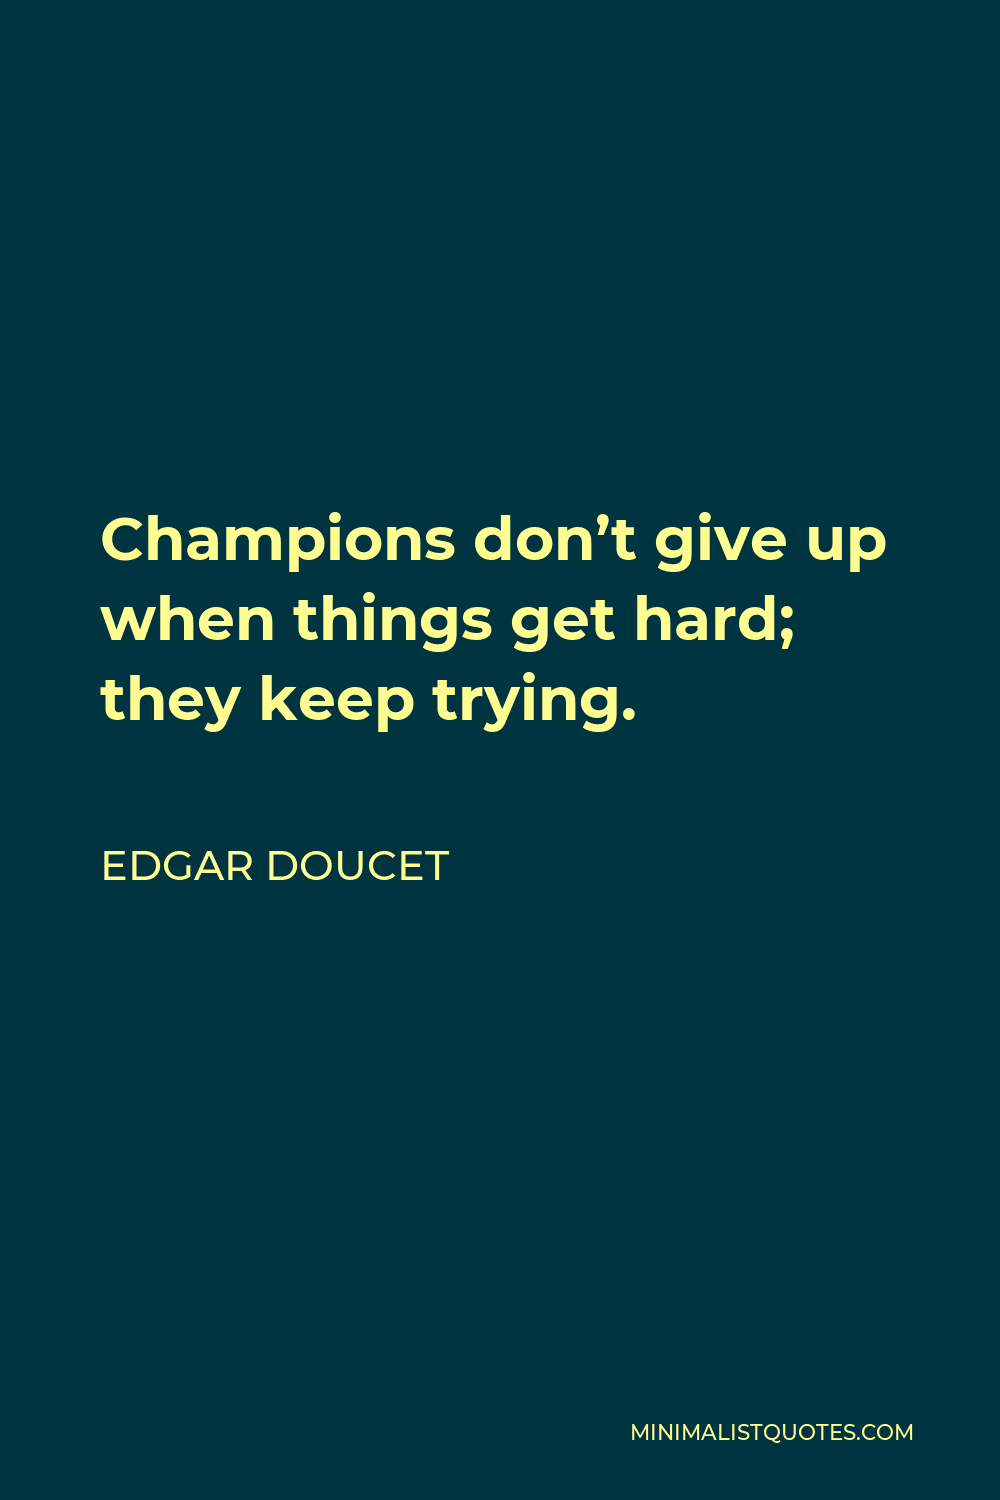 Edgar Doucet Quote - Champions don’t give up when things get hard; they keep trying.  